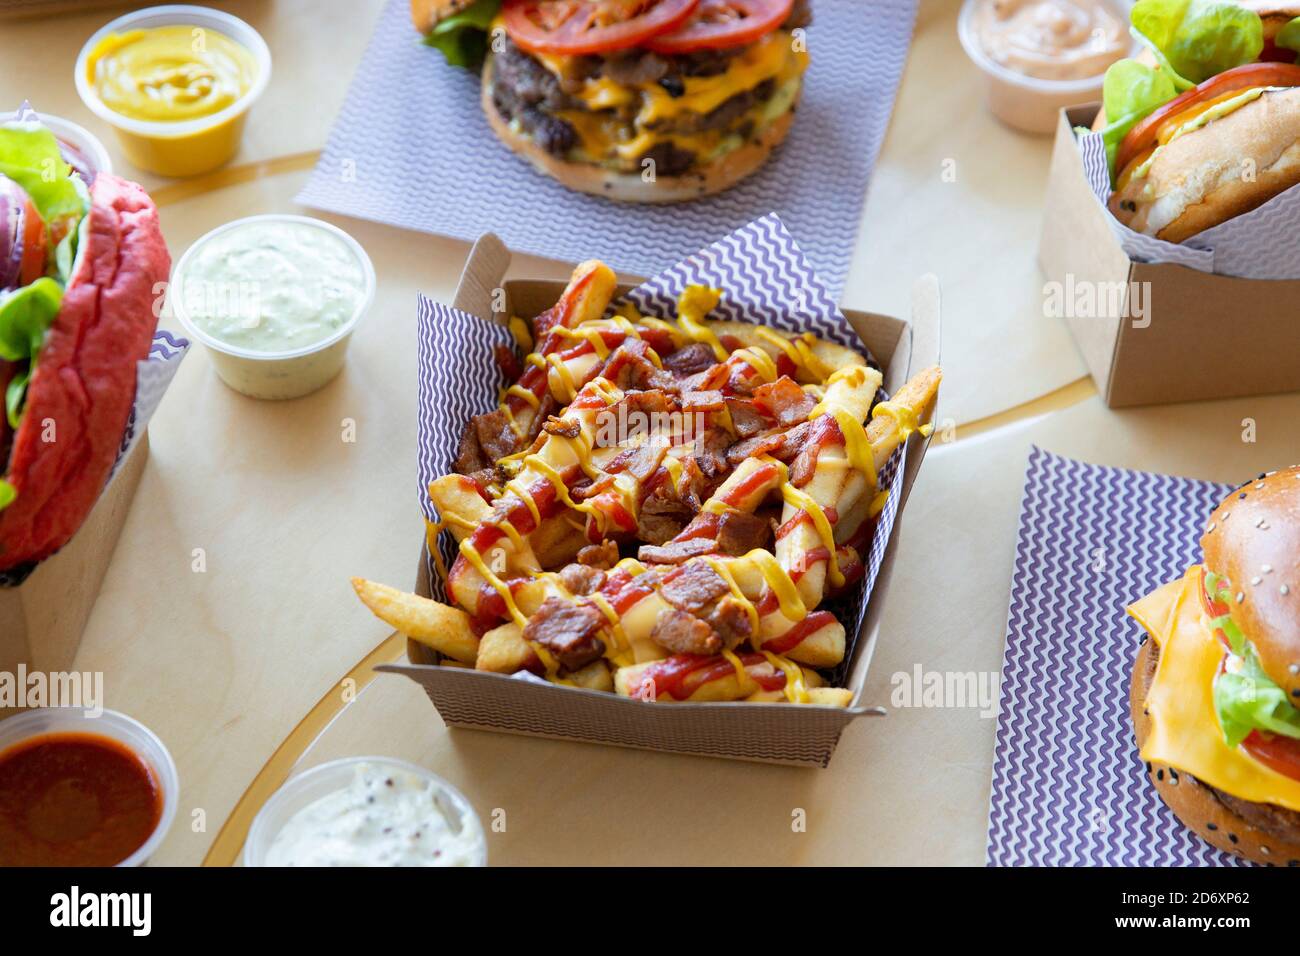 Take out burger restaurant table setting with poutine cheese & bacon loaded fries. Stock Photo